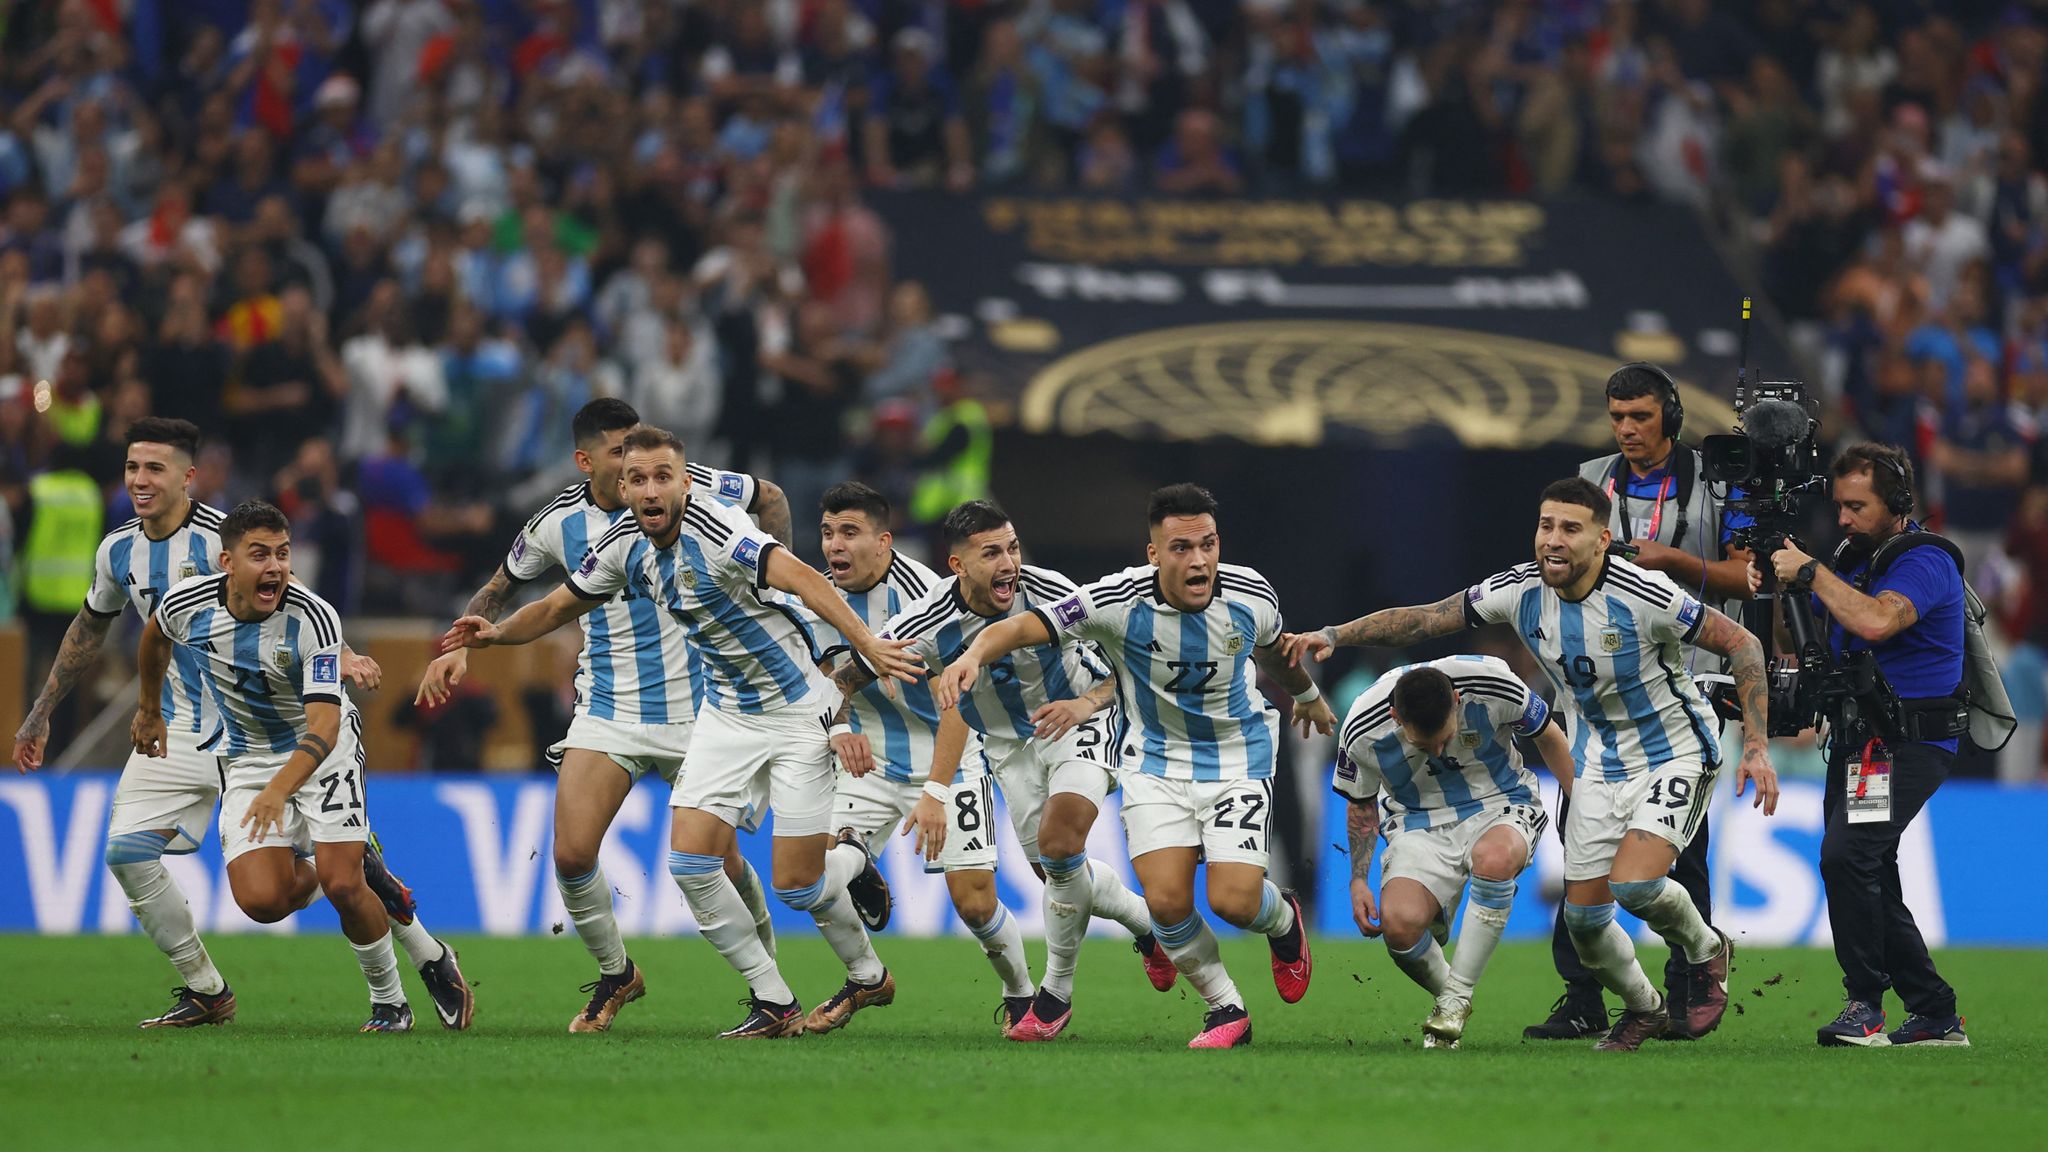 Later, a sensational counterattack down the right flank by Brighton's Alexis Mac Allister provided the assist for Argentina's second goal, which was scored by Angel Di Maria.